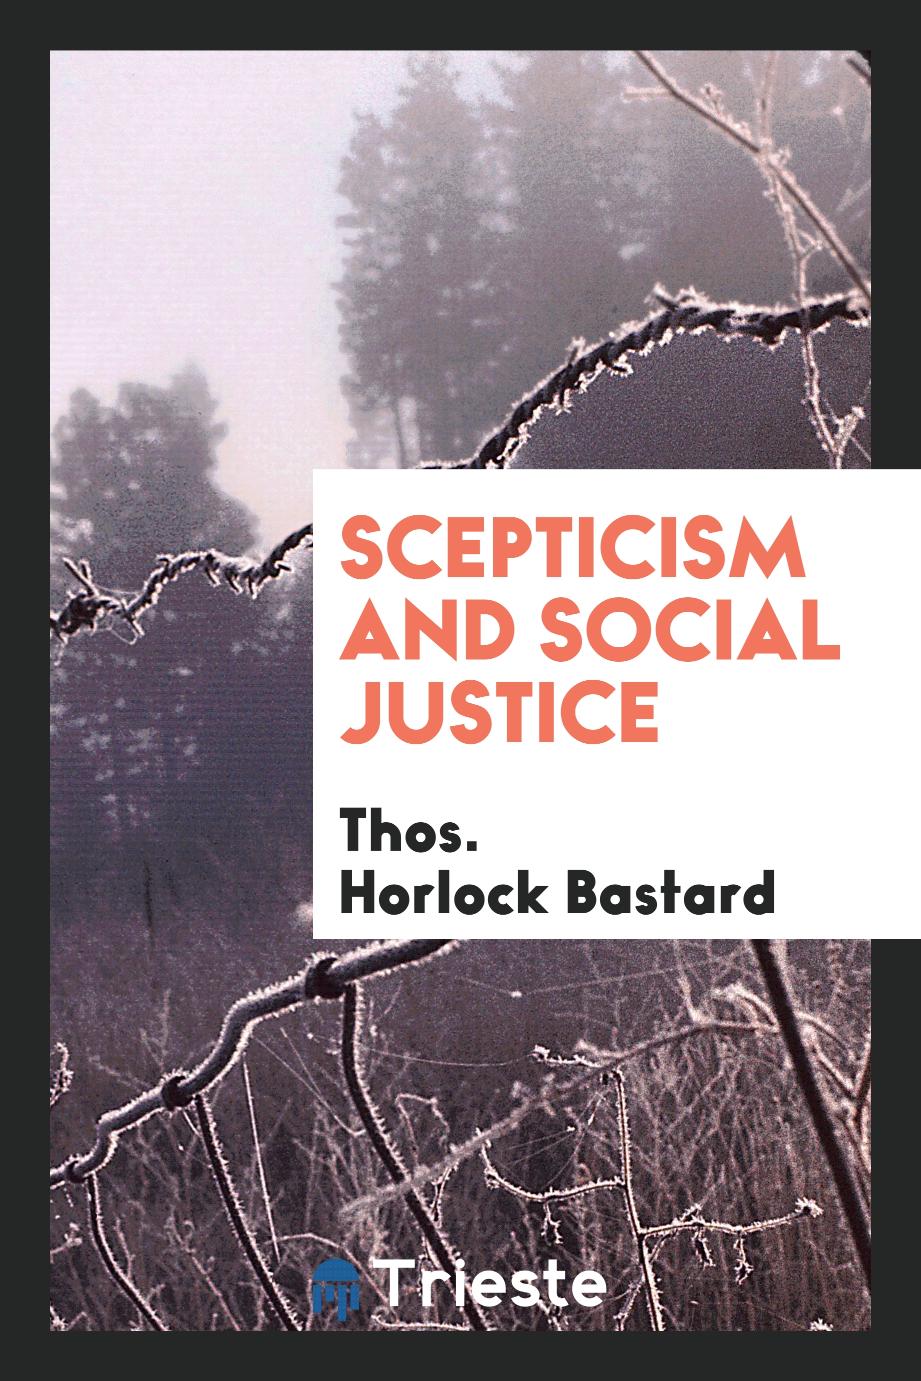 Scepticism and social justice